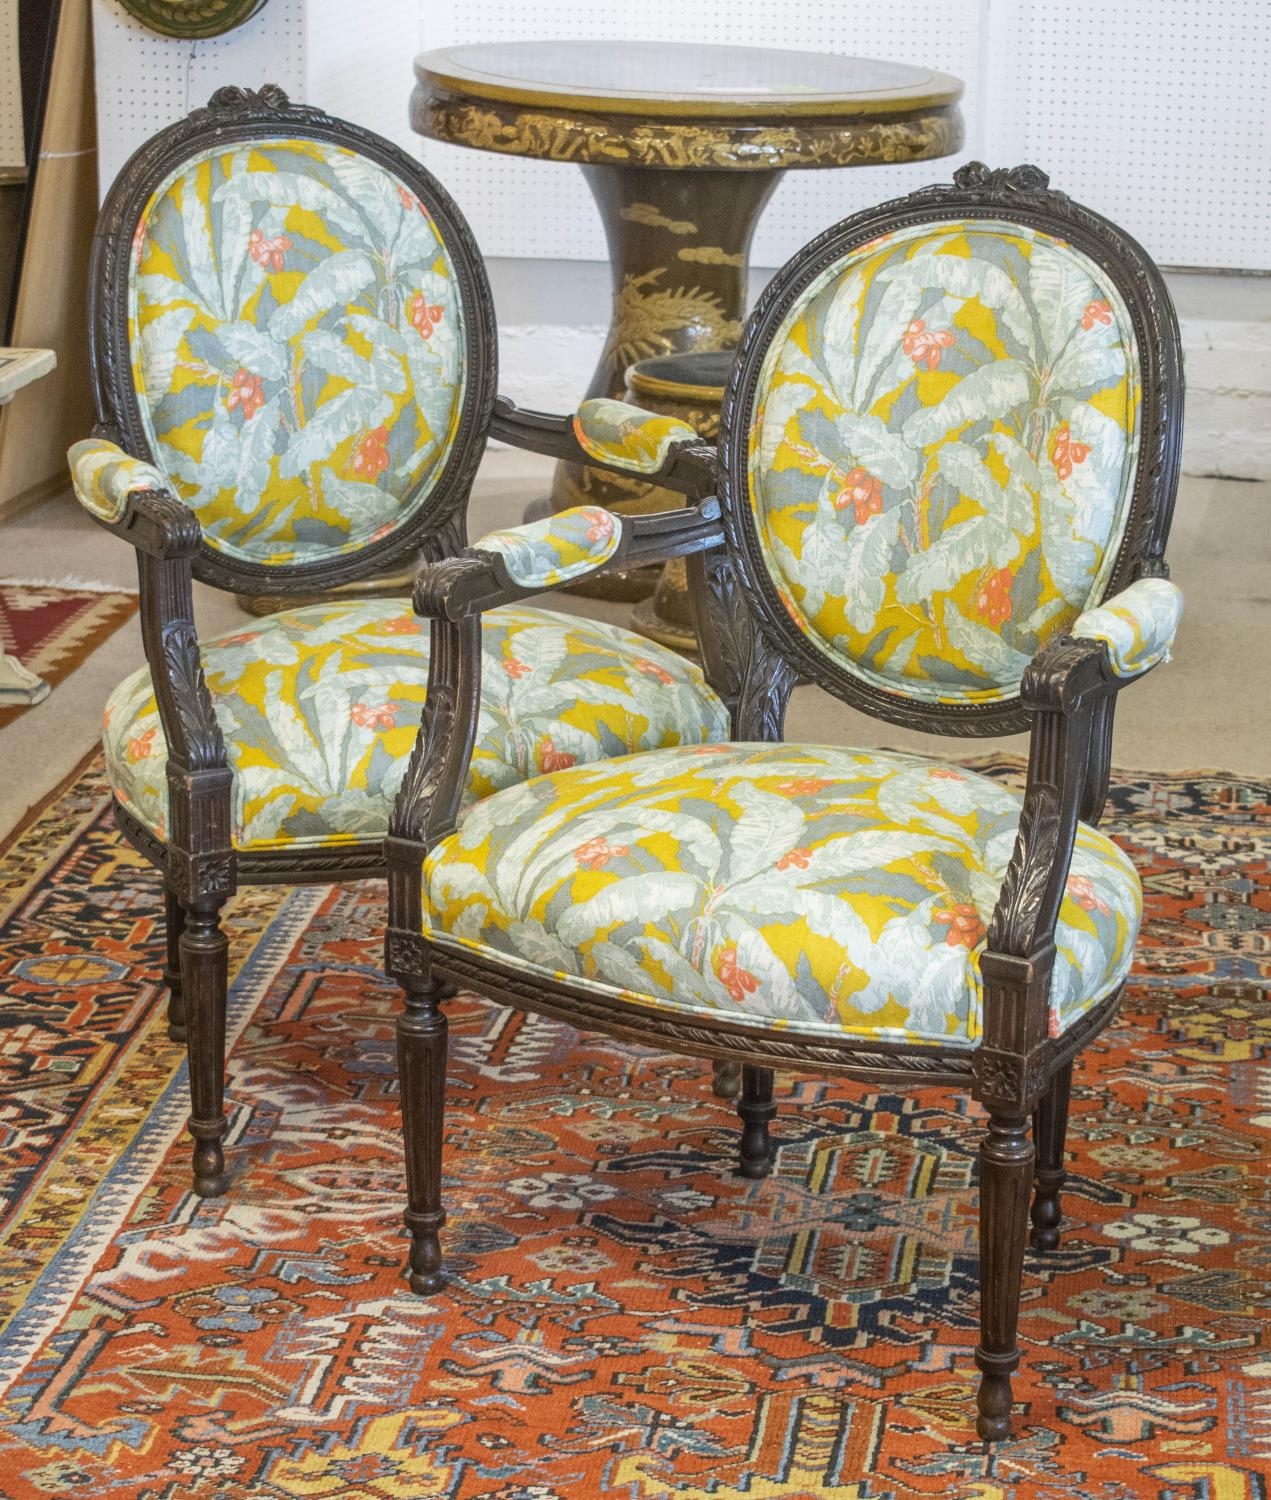 FAUTEUILS, 92cm H x 60cm, a pair, early 20th century French stained beech in new leaf patterned